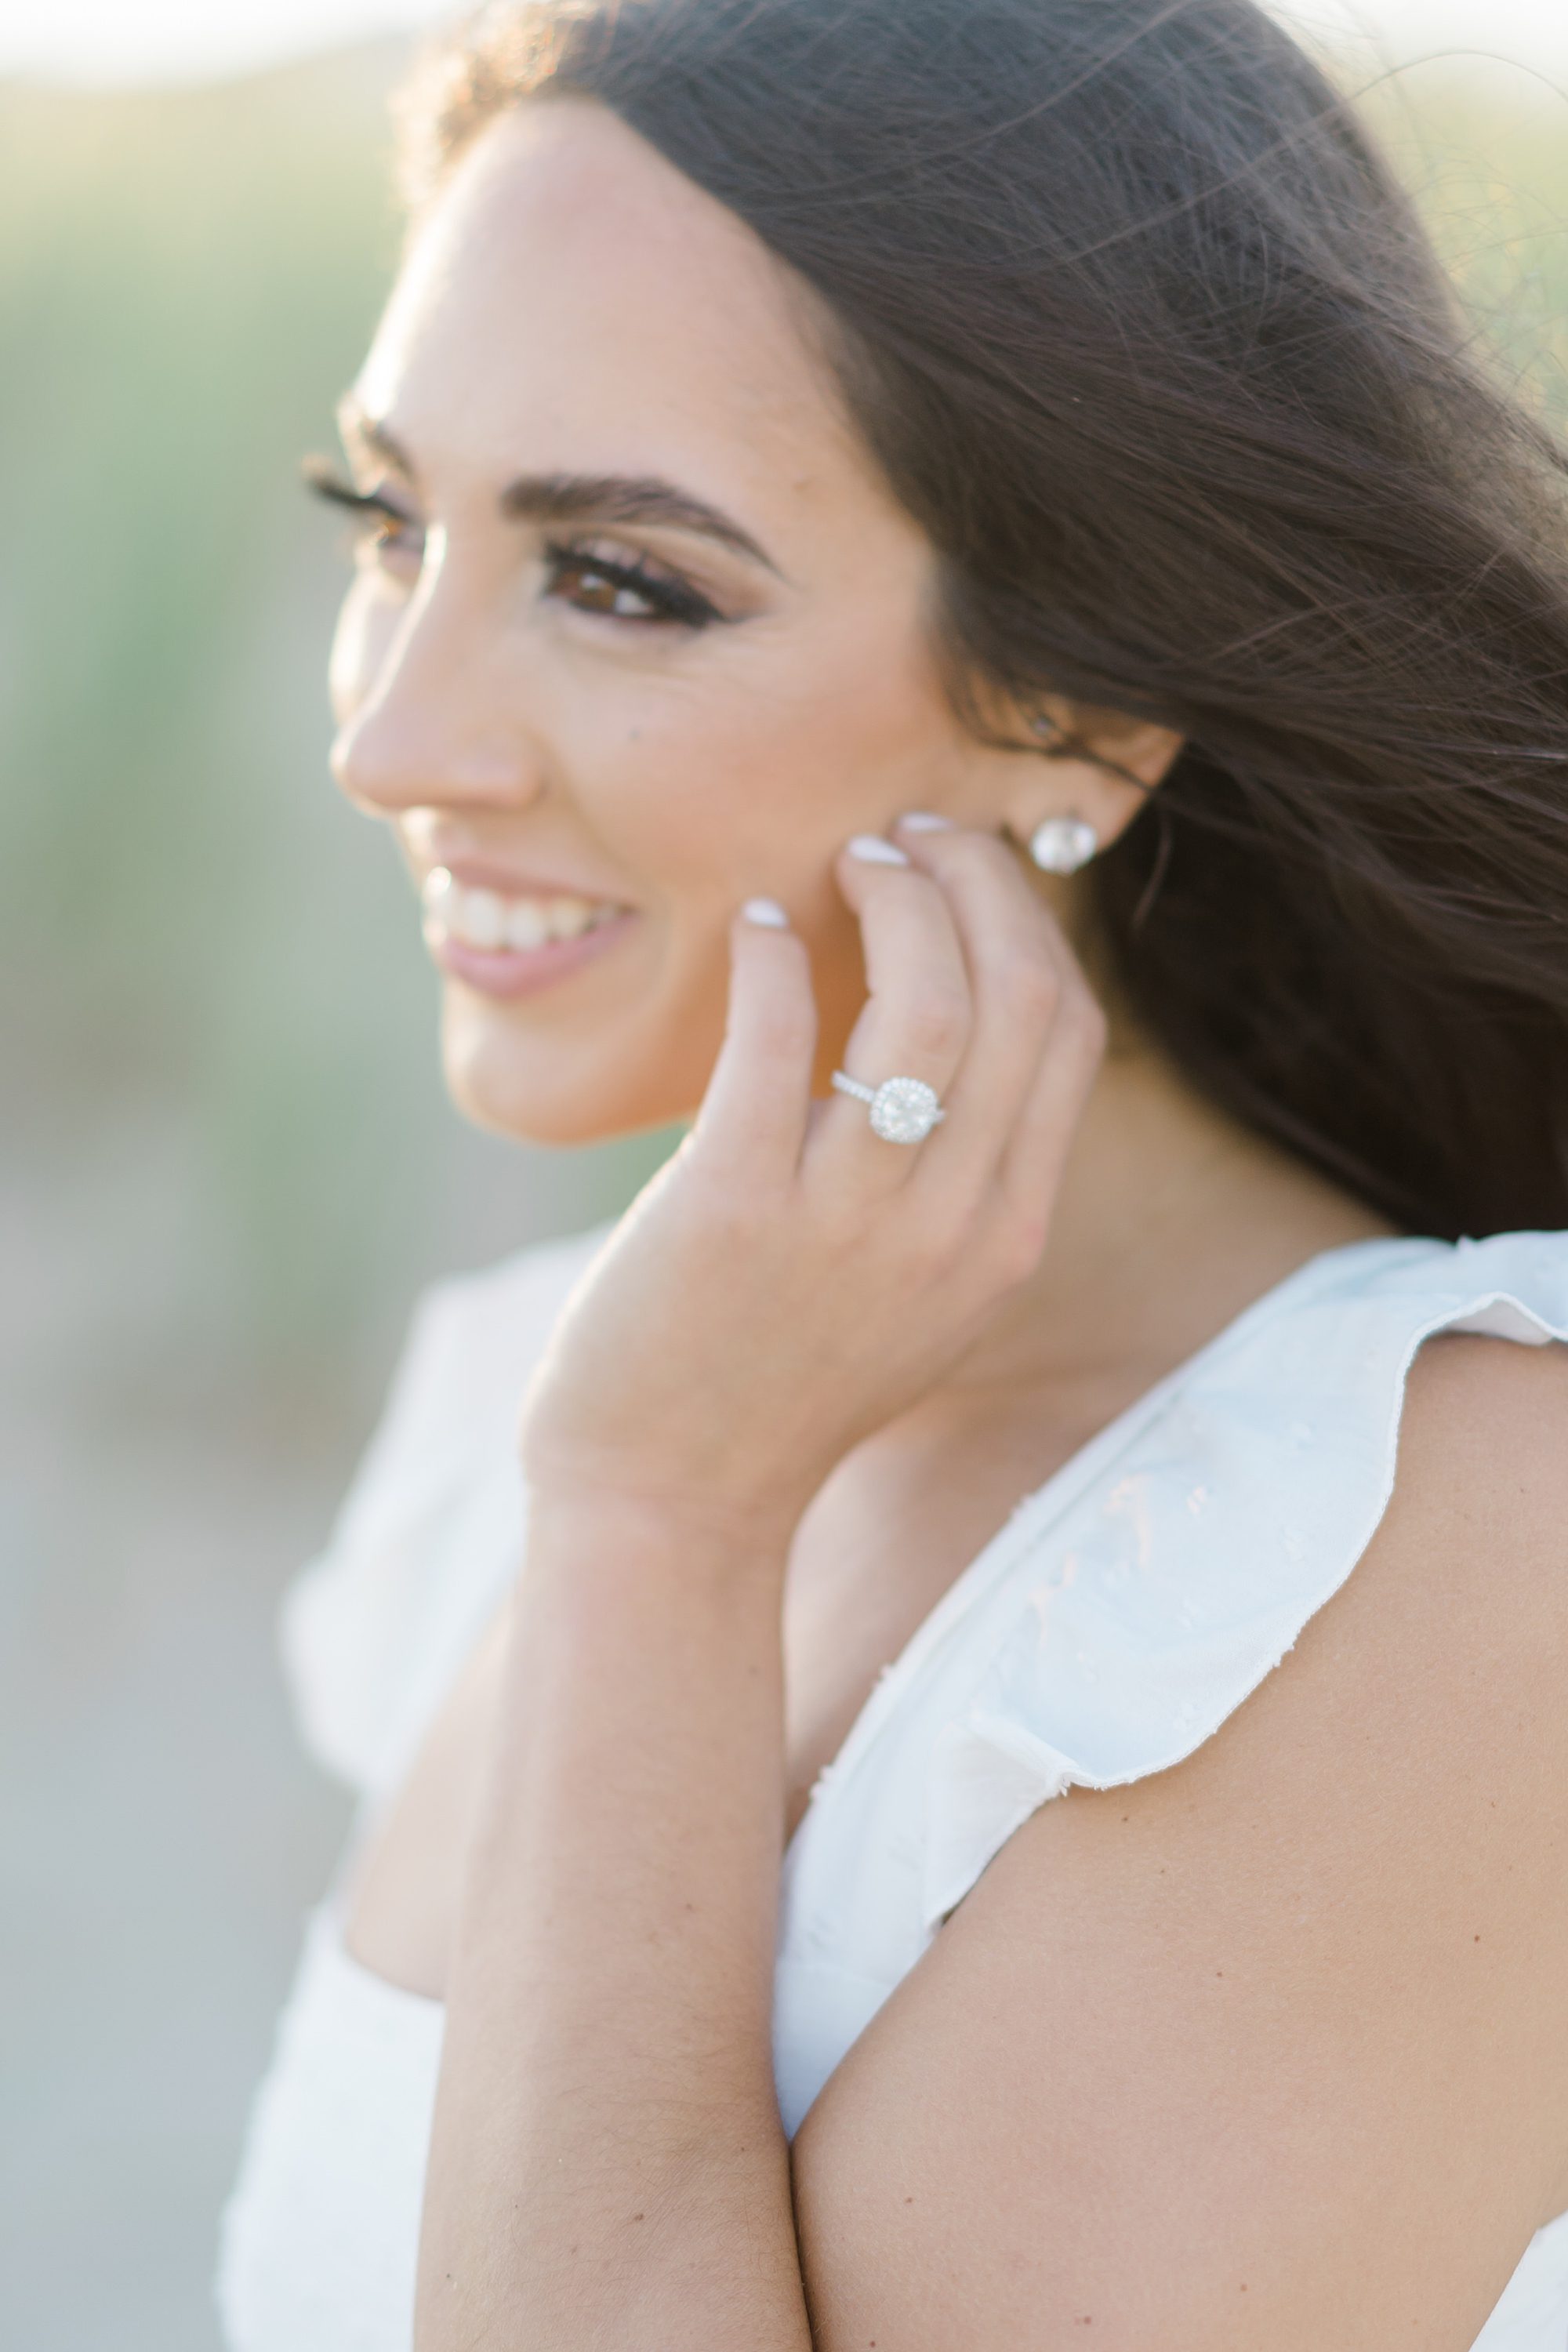 woman shows off engagement ring during engagement session